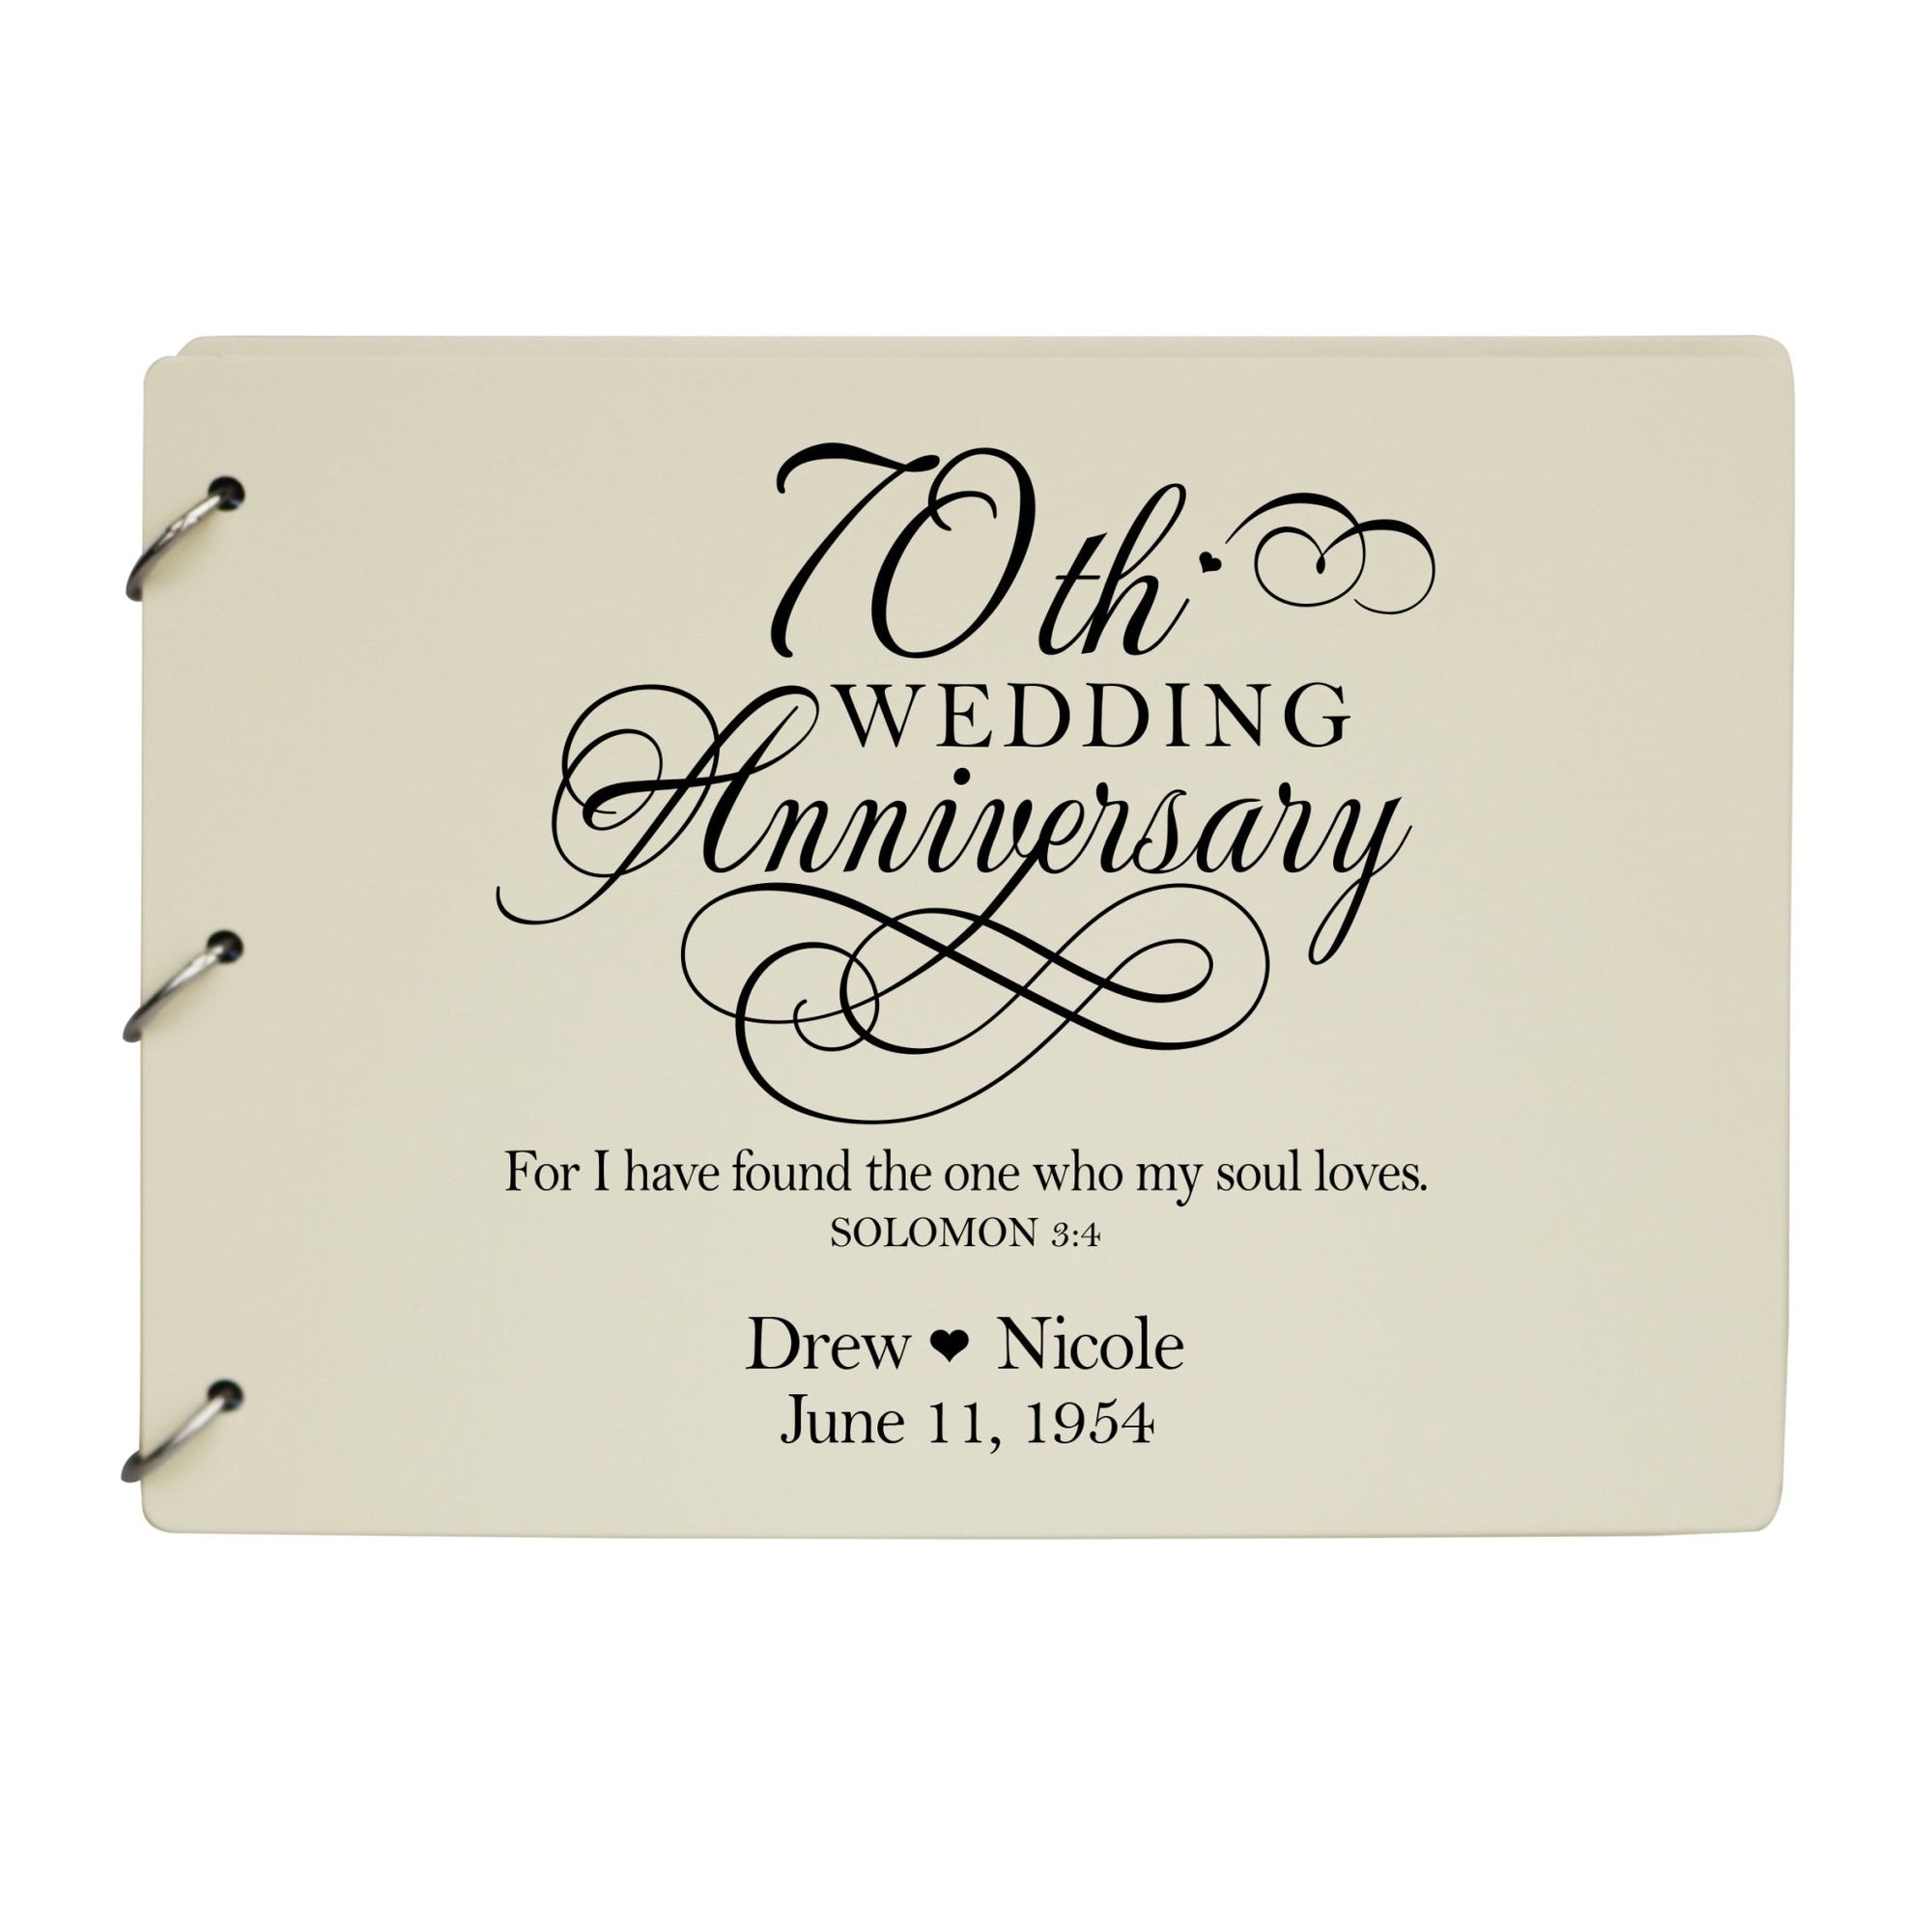 Personalized 70th Wedding Anniversary Guestbook - LifeSong Milestones